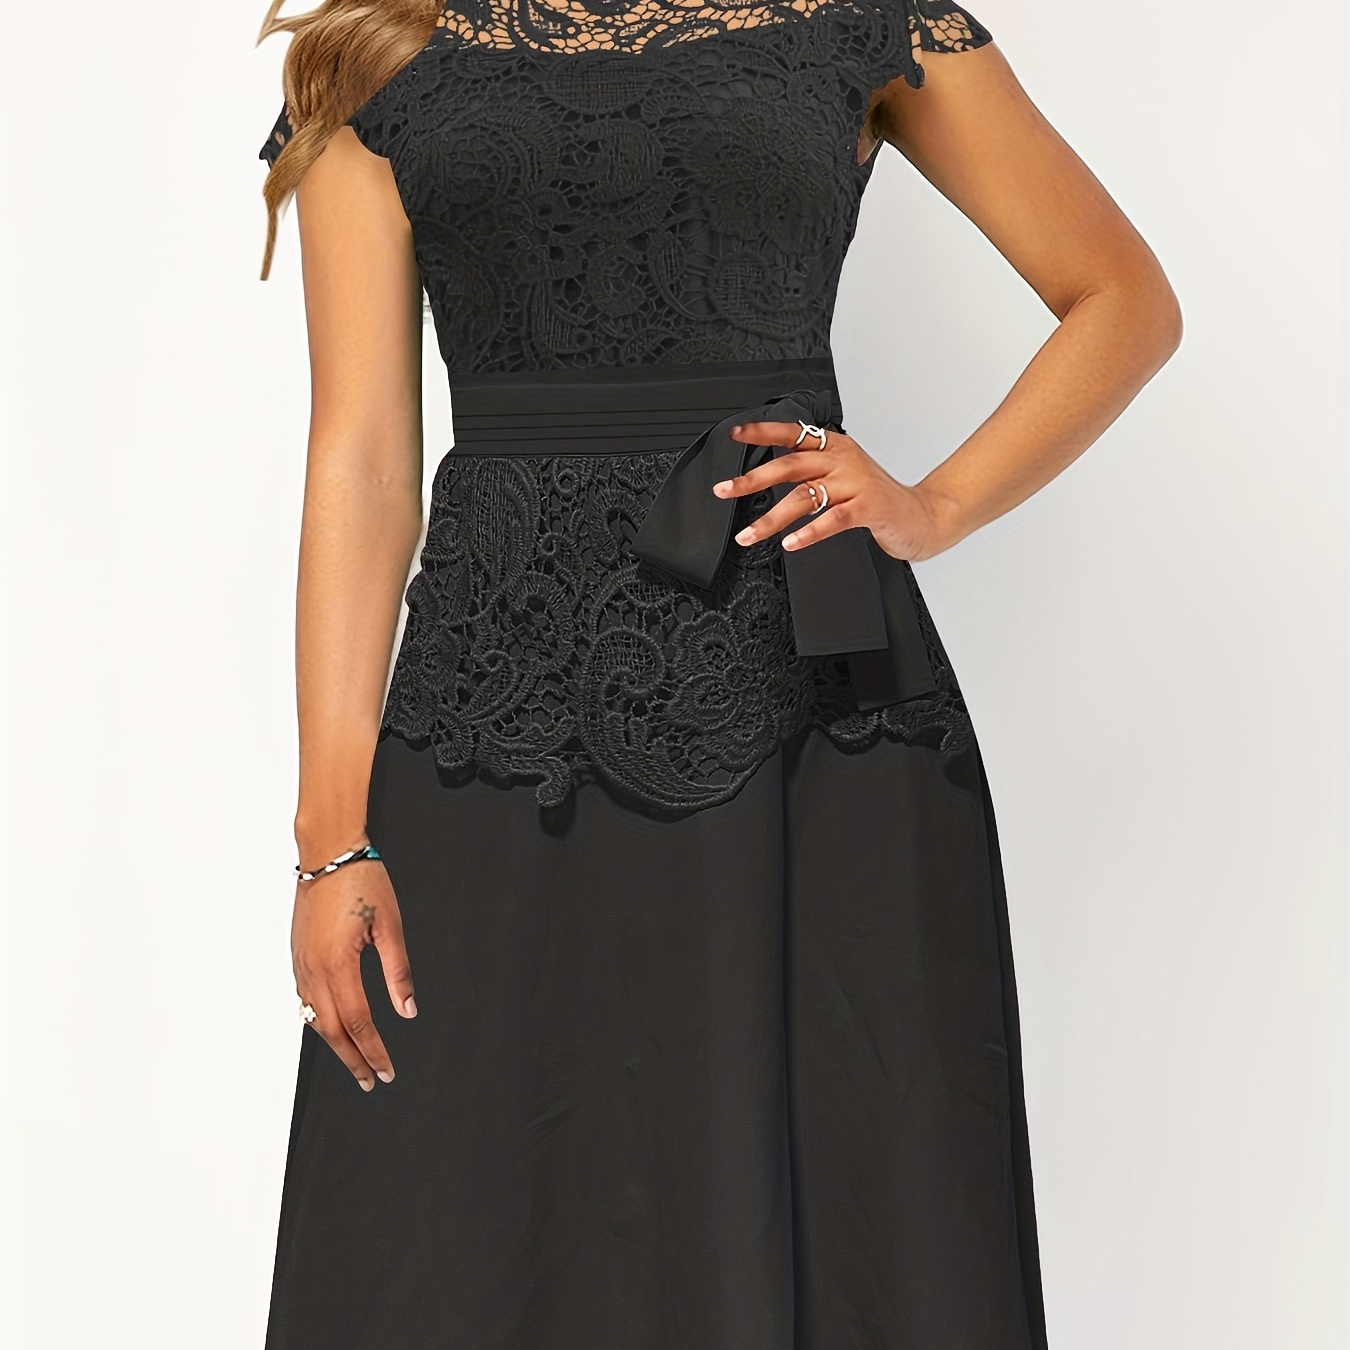 

Elegant Lace Contrast Dresses, Cap Sleeve Crew Neck A Line Dresses With Belted, Women's Clothing